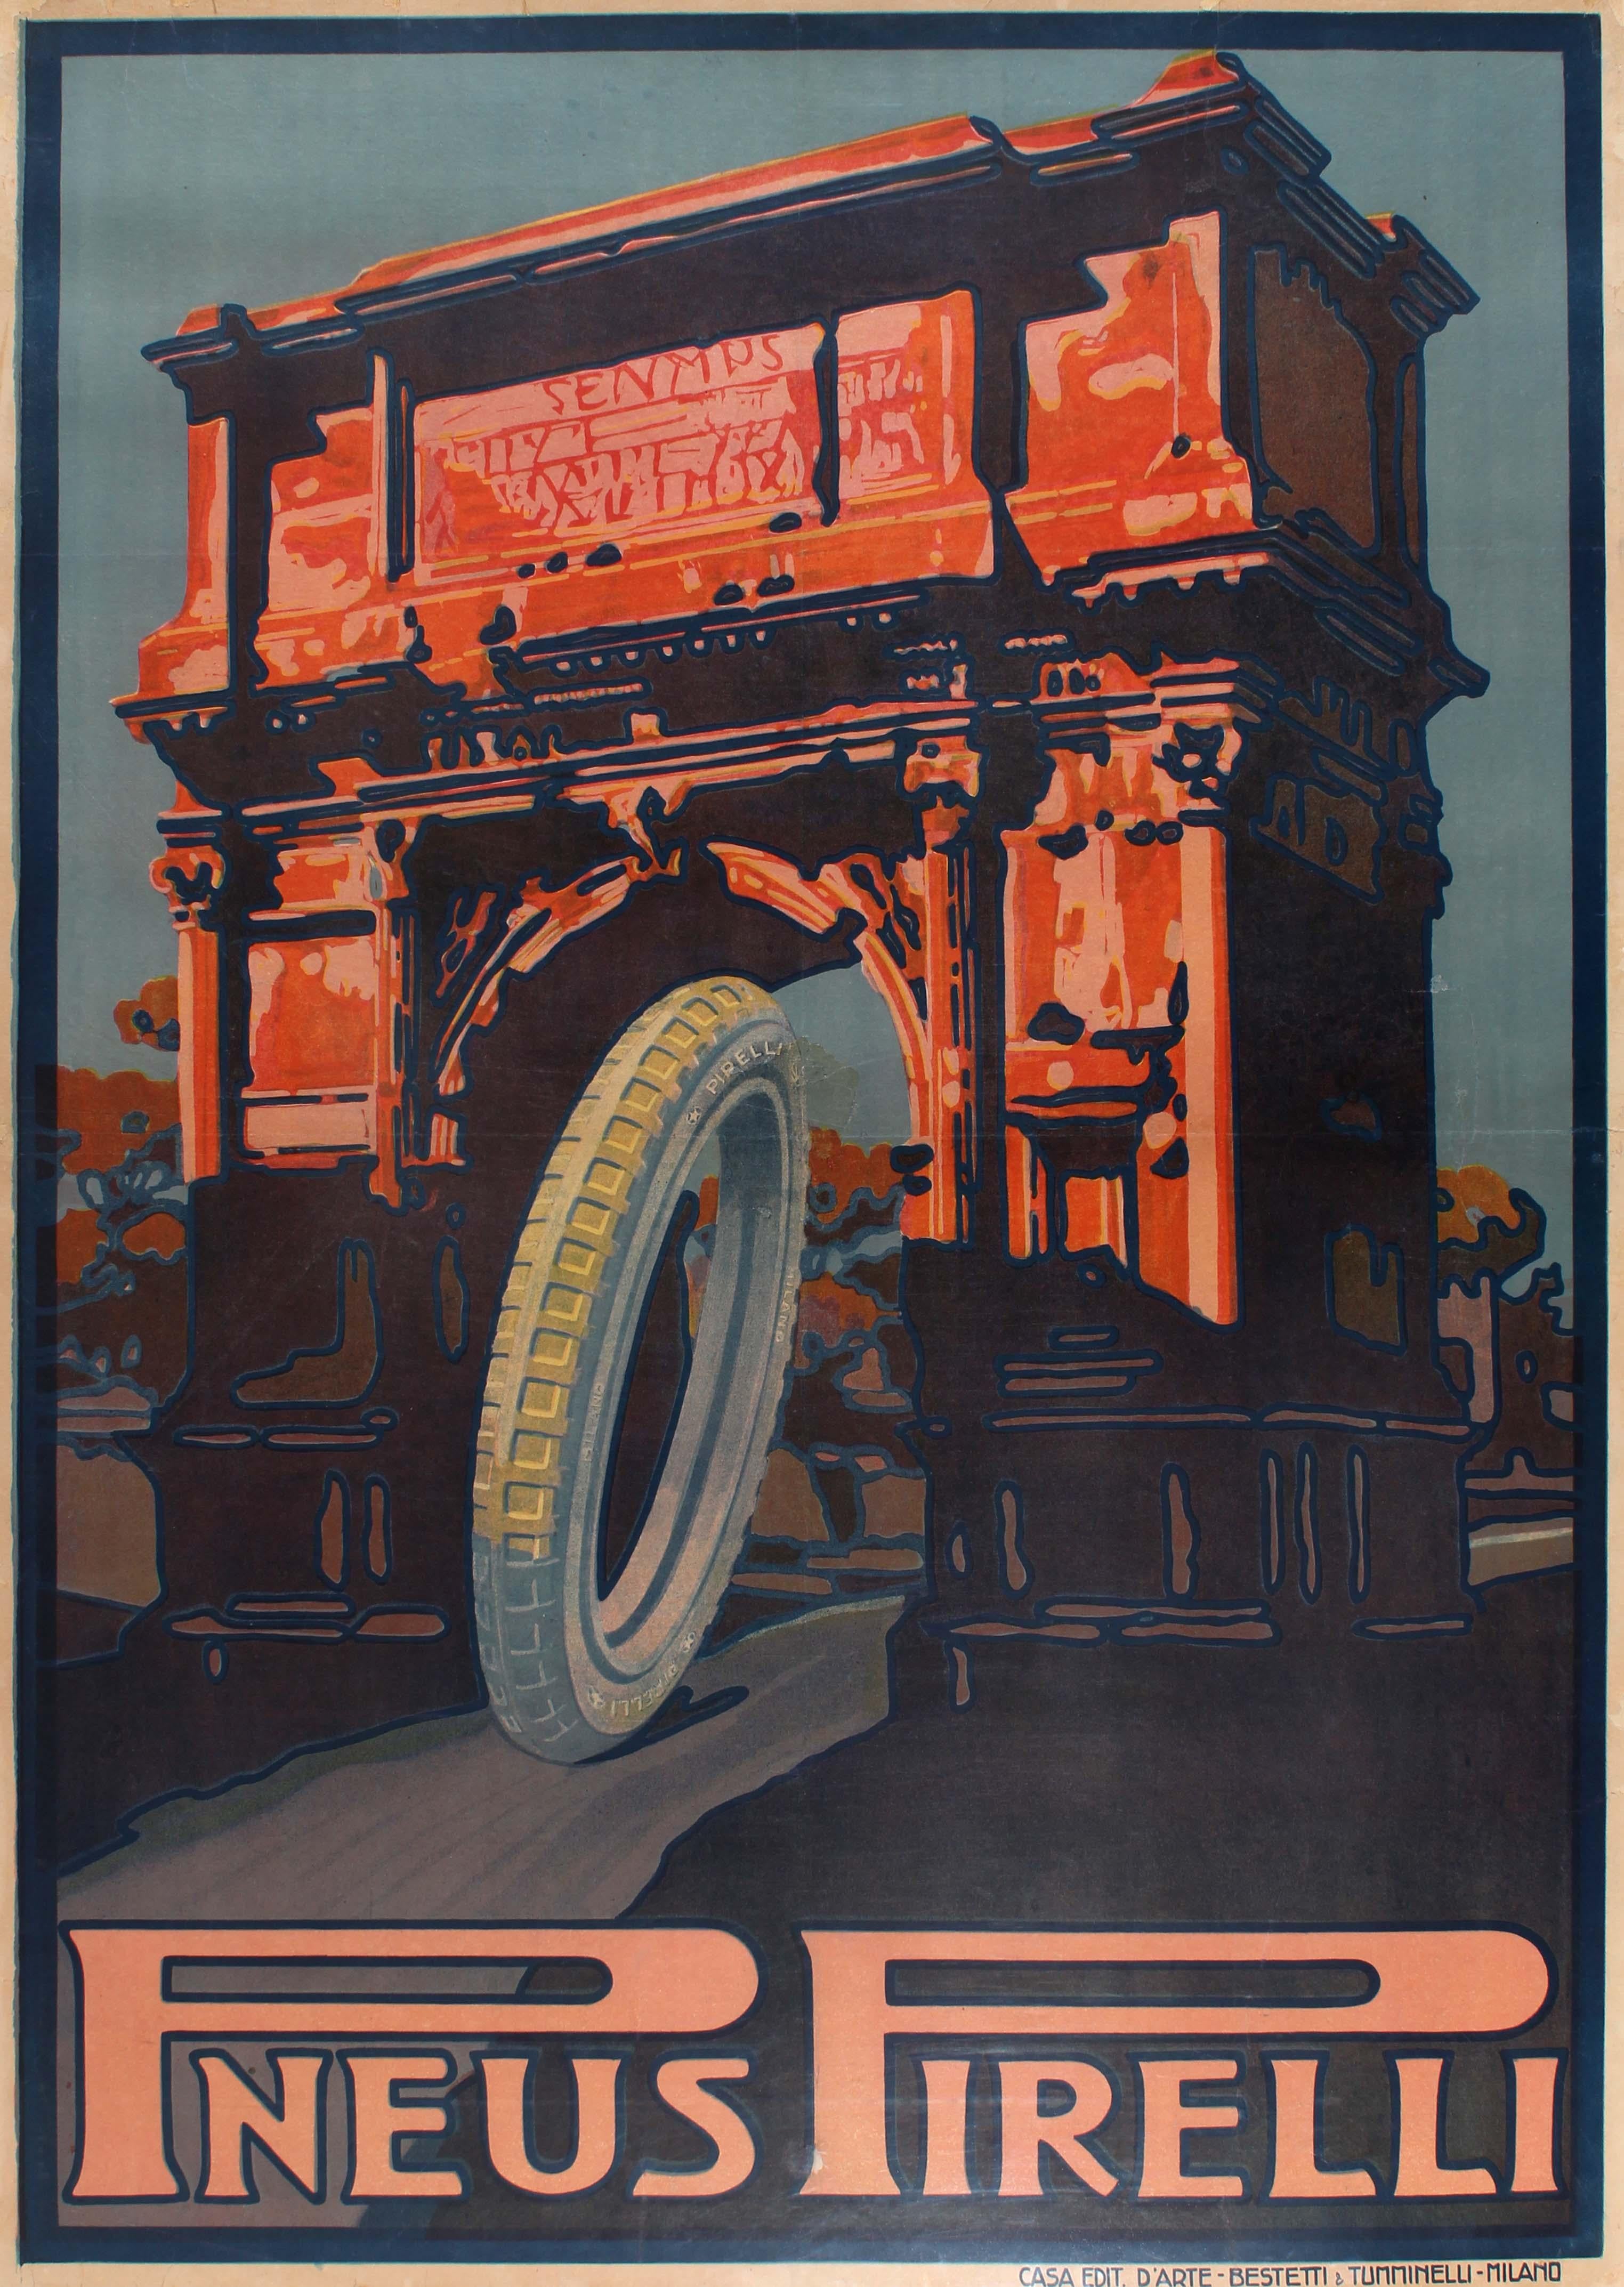 Unknown Print - Original Vintage Poster For Pneus Pirelli Tyres Ft Historic Roman Arch And Tire